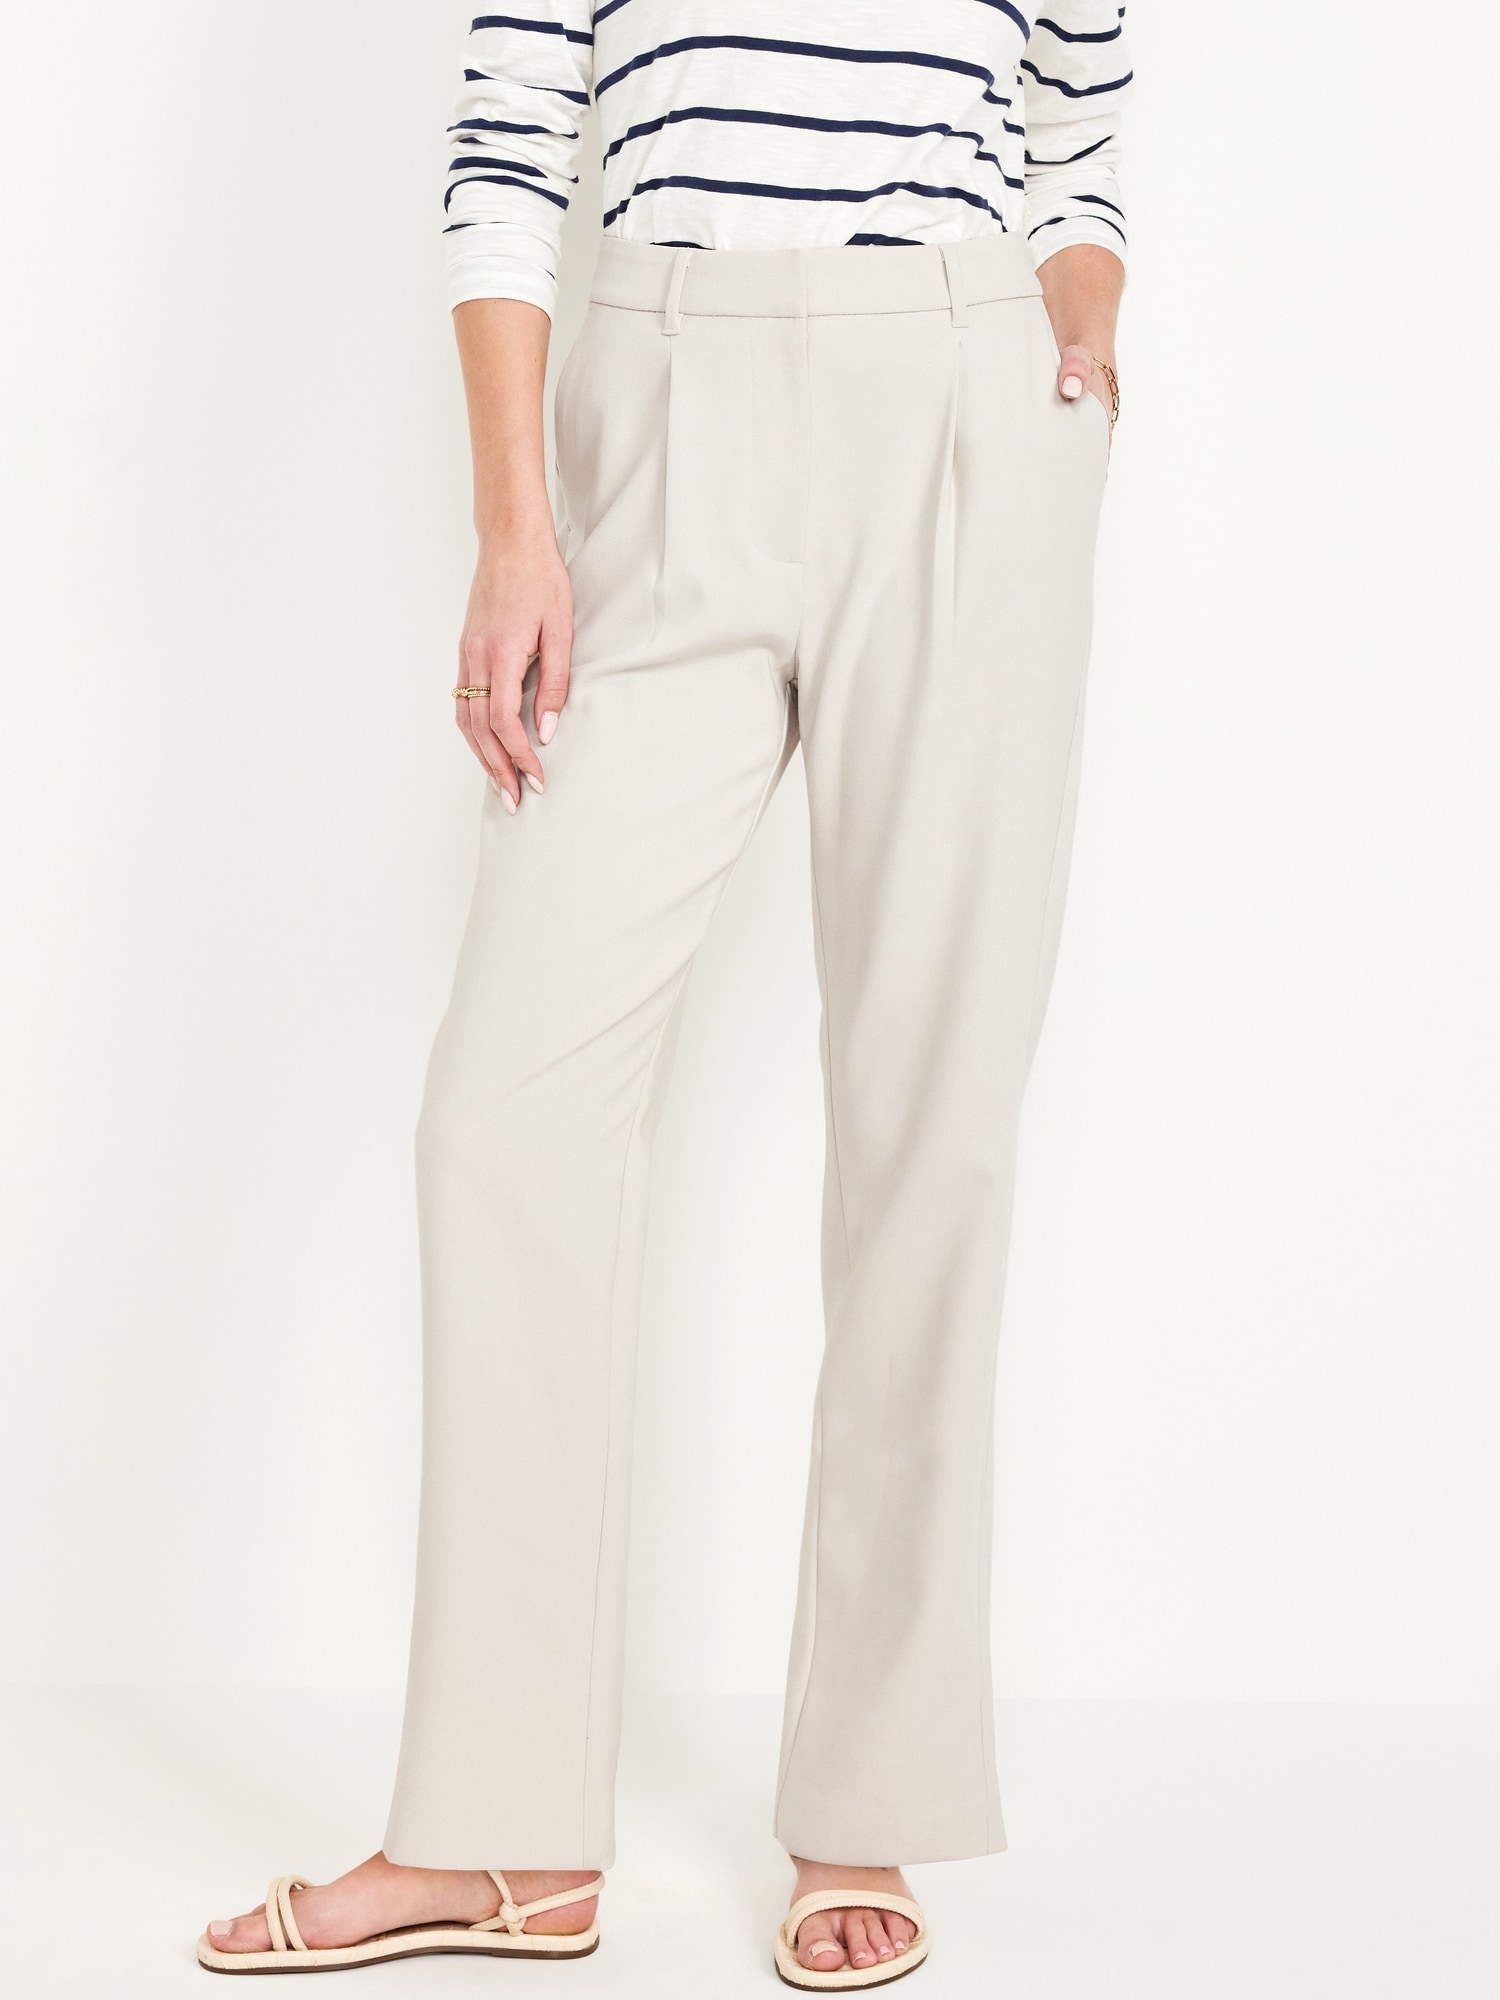 Work Pants, Premium, Ladies, 65/35, Button Closure - SA4990 BC Textile  Innovations - Ladies Work Pants, Work Pants, Chef Pants [SA4990] - $23.35 :  BC Textile Innovations, - Commercial Linen, Uniforms, and related Laundry  Supplies